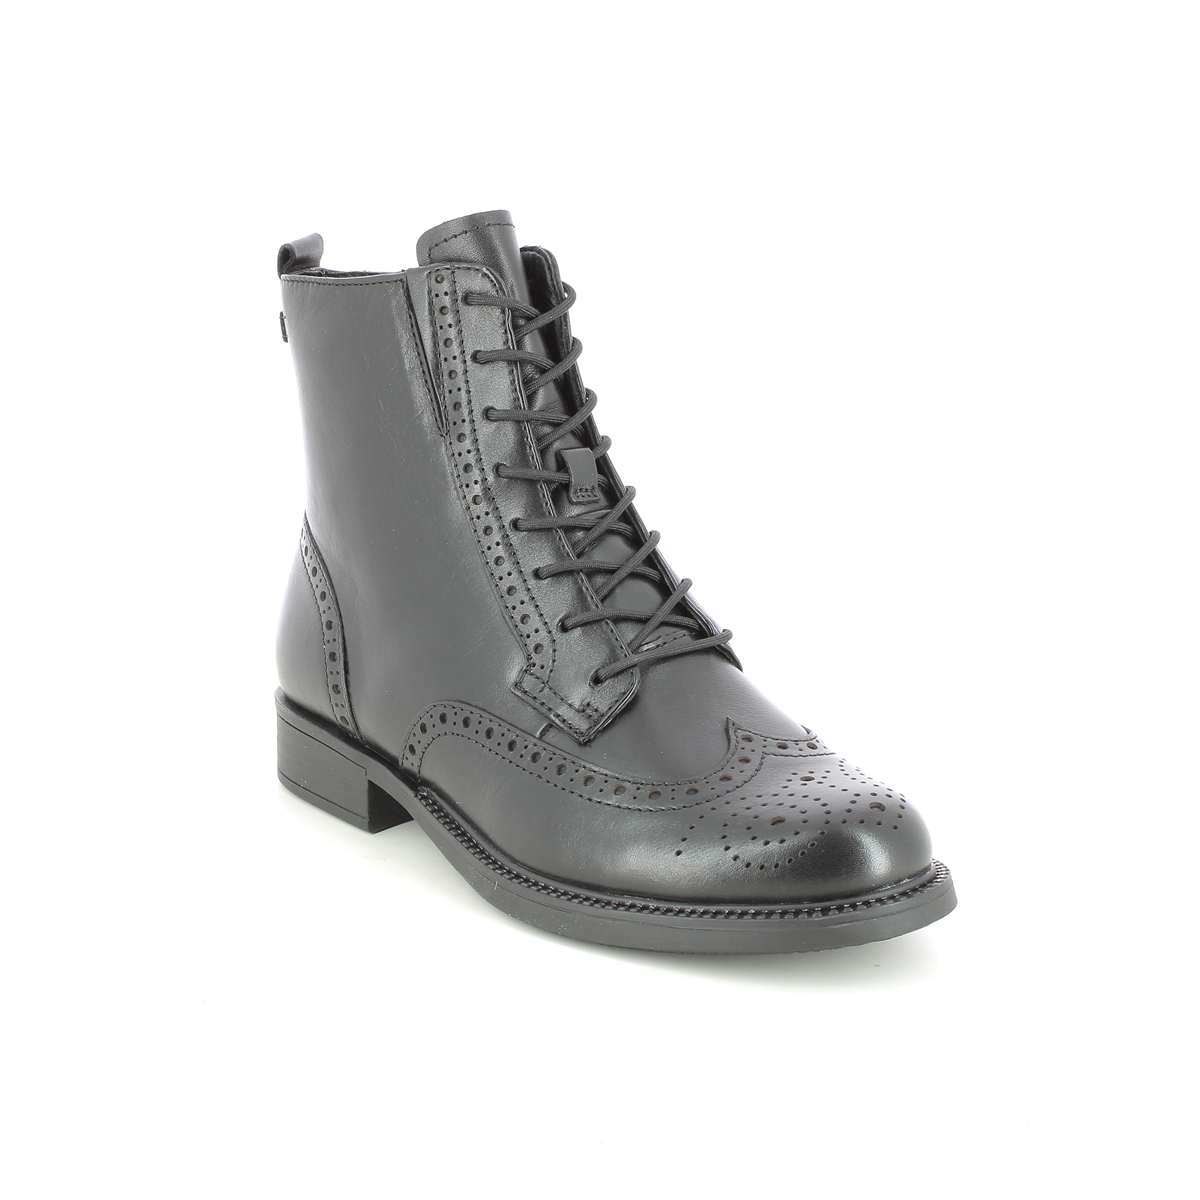 Tamaris Suzan Brogue Black leather Womens Lace Up Boots 25106-27-003 in a Plain Leather in Size 36